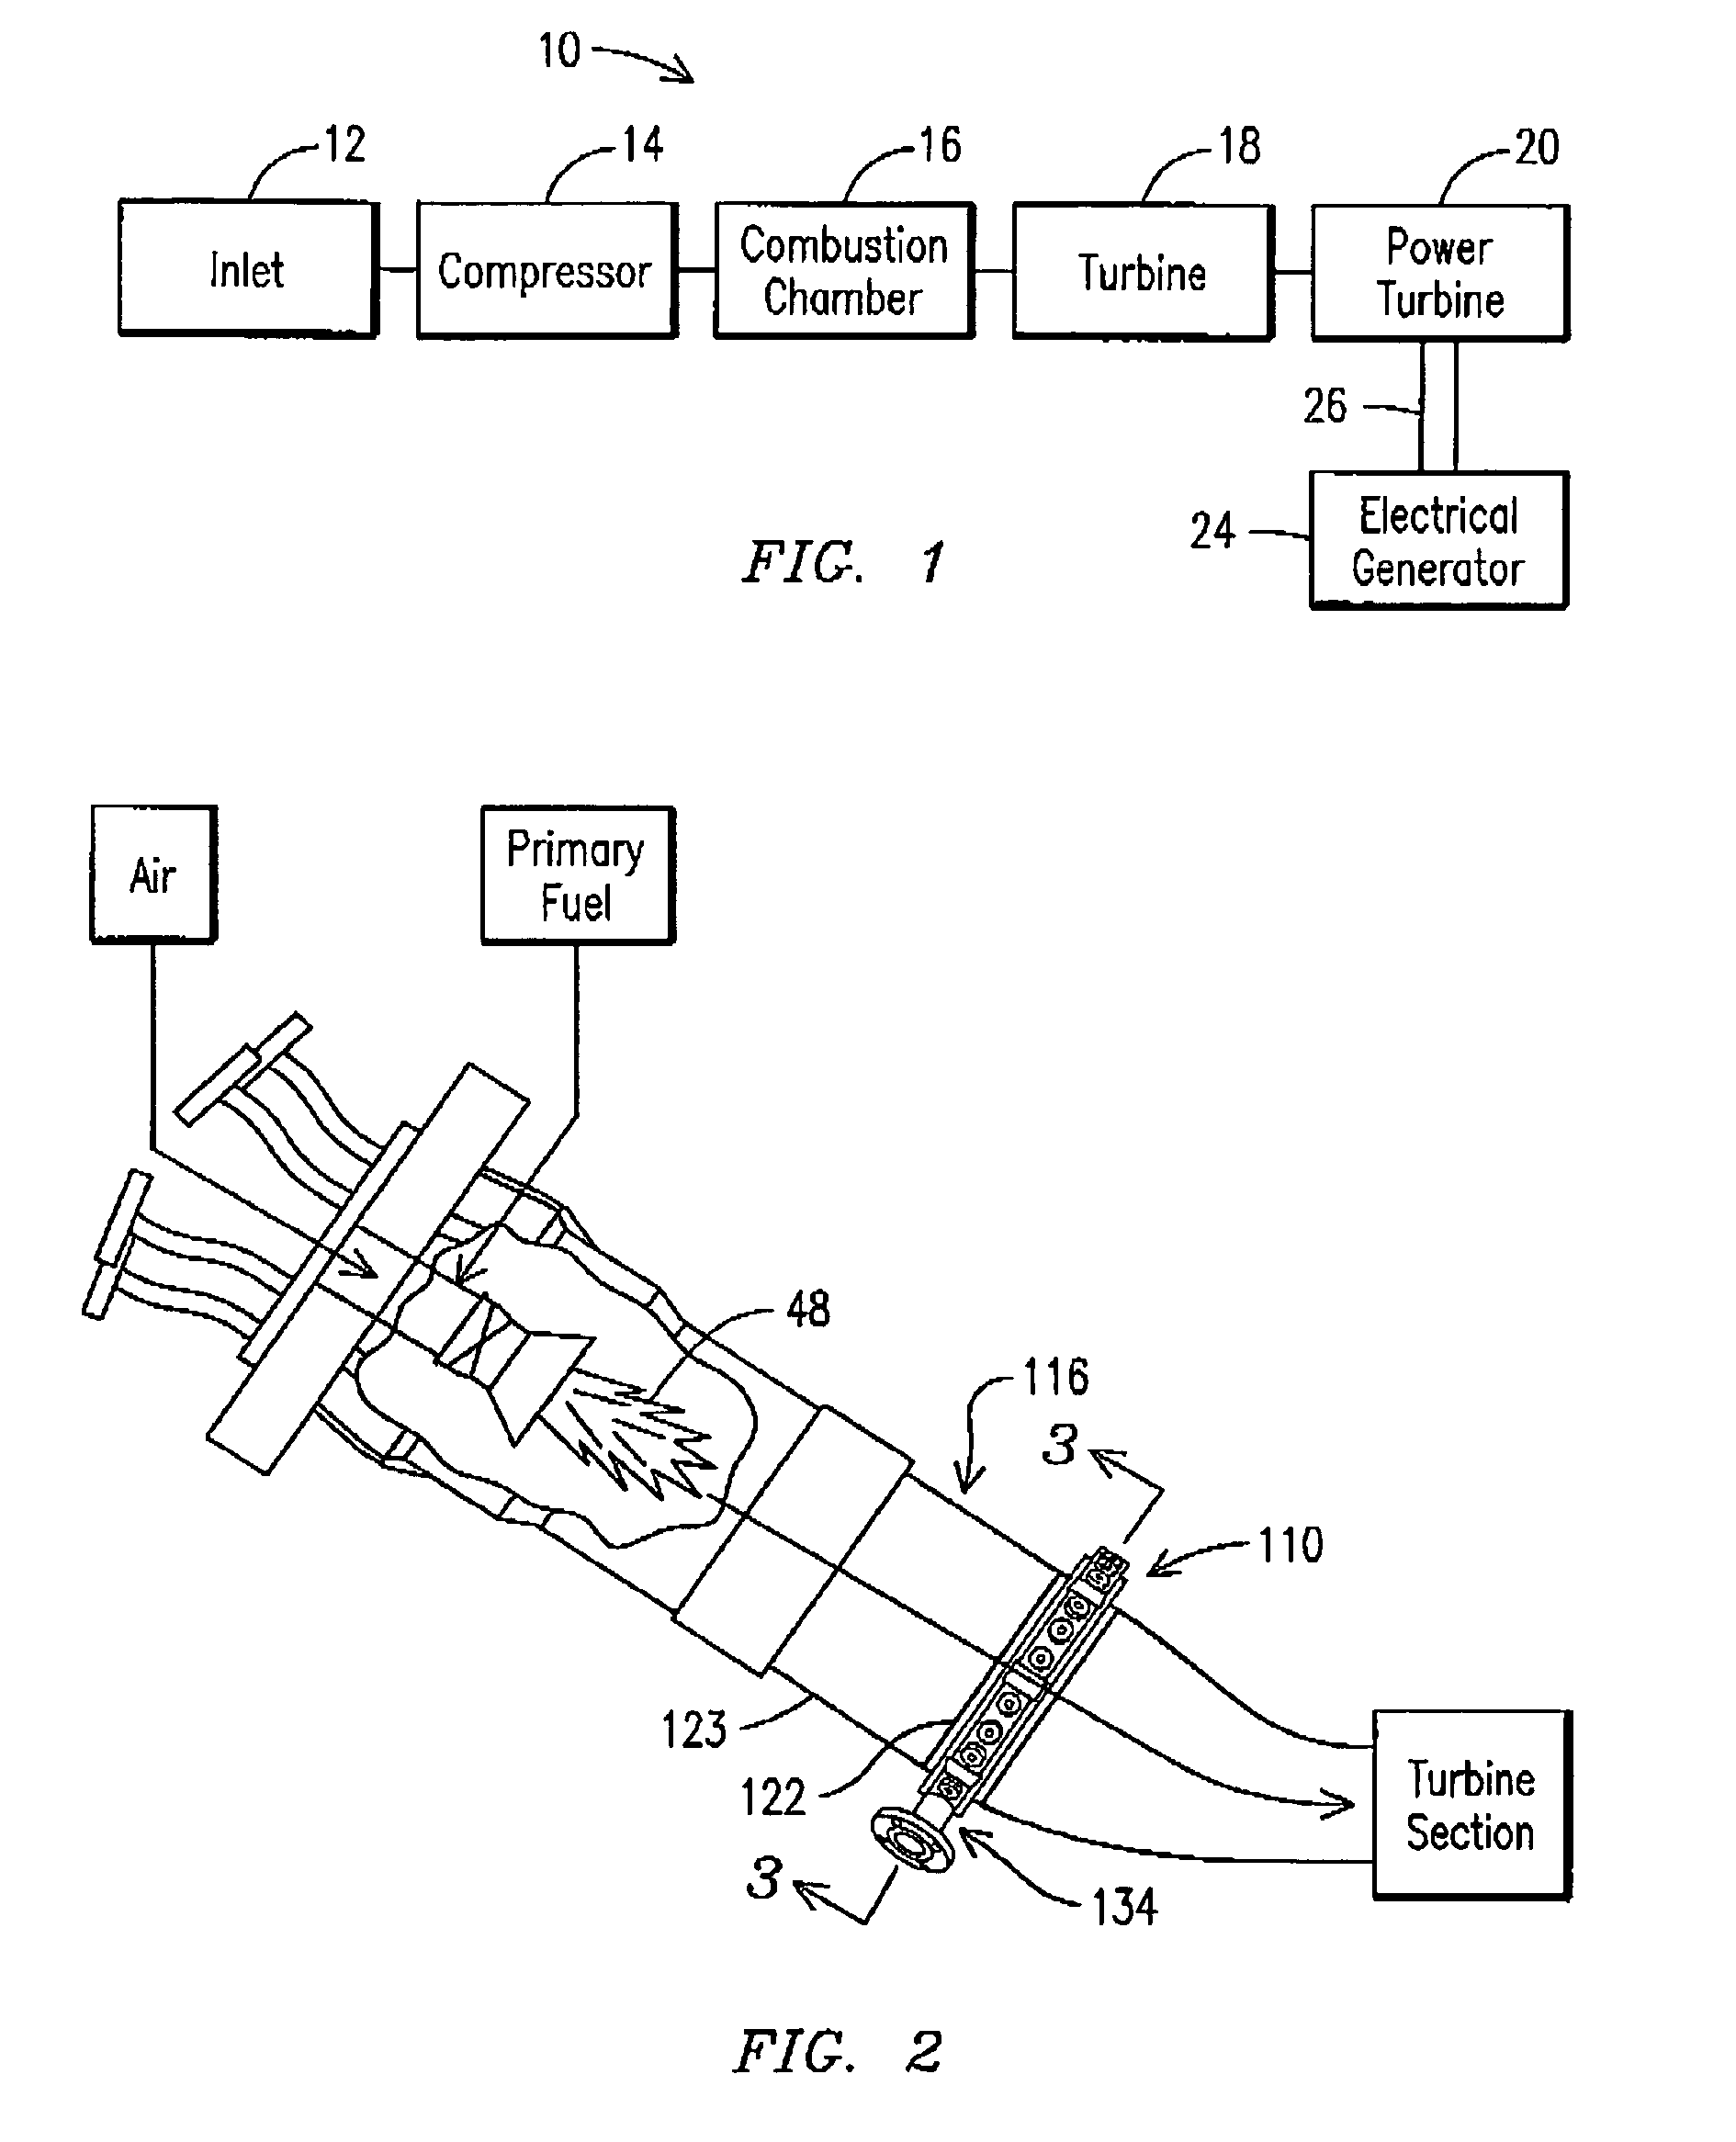 Secondary fuel delivery system